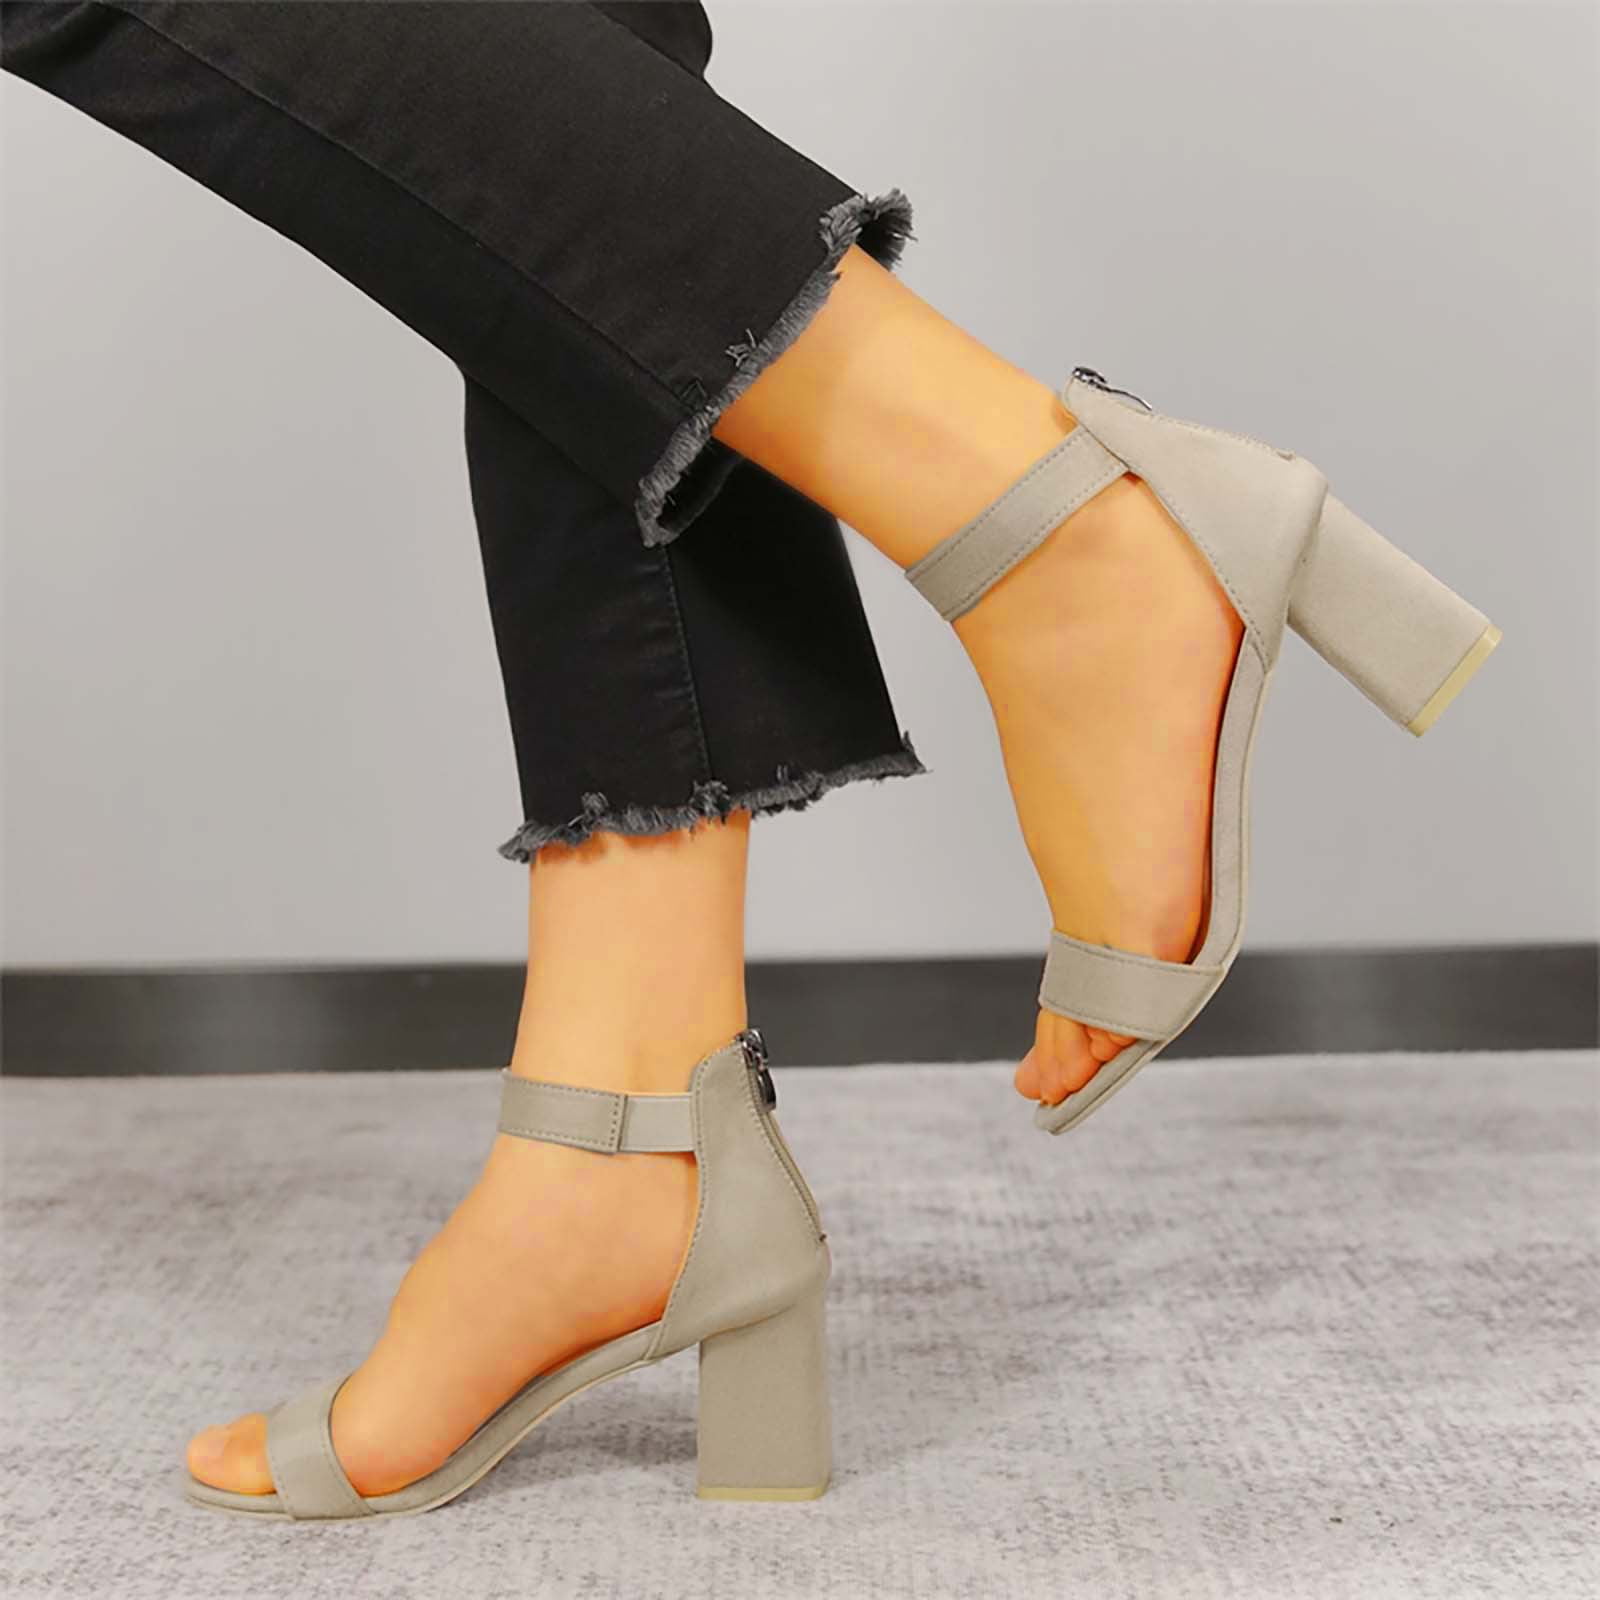 Summer Block Heels Sandals High Platform Pumps For Women | Nude Straps,  Chunky Heels | Yellow/Pink From Esfb, $36.93 | DHgate.Com